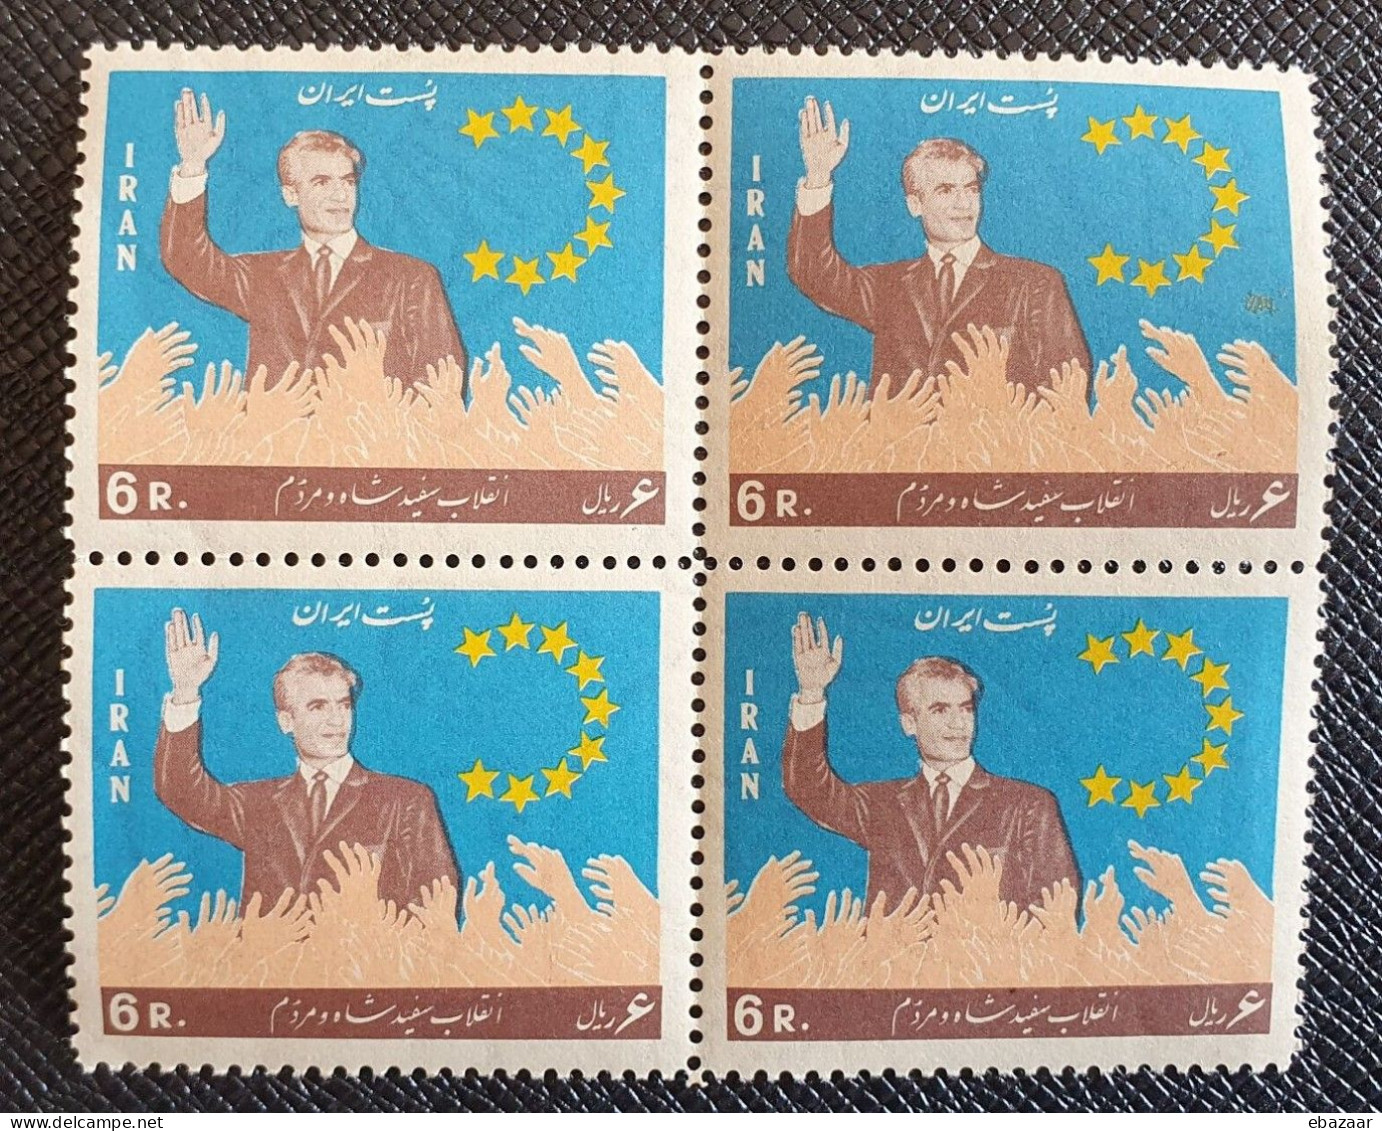 Iran 1967-The 4th Anniversary Of The White Revolution Stamps Block Of 4 MNH - Iran